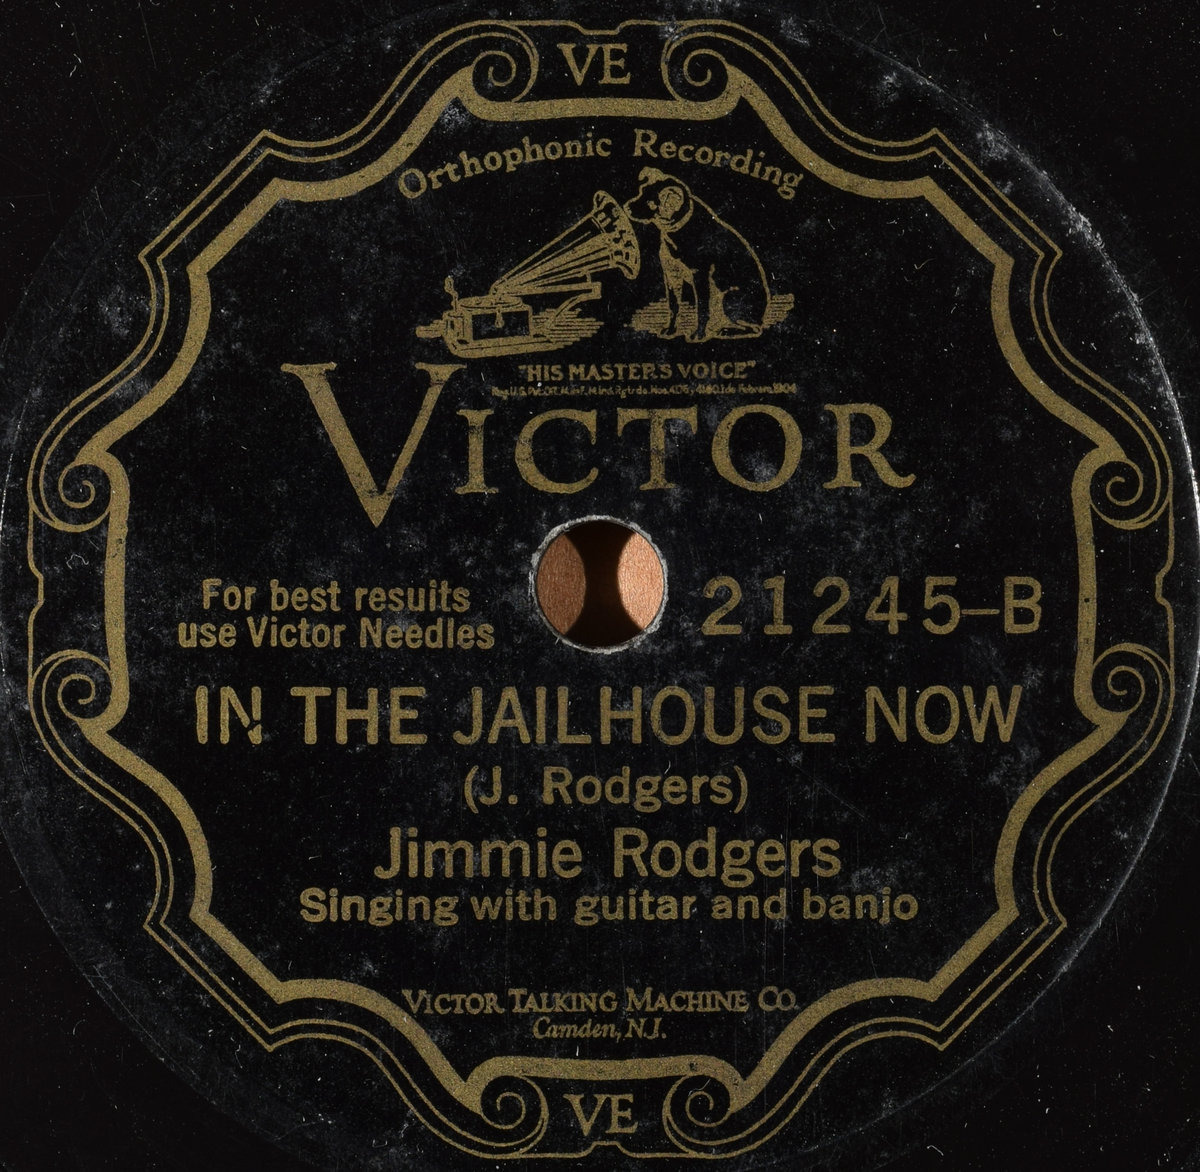 In the Jailhouse Now - Jimmie Rodgers